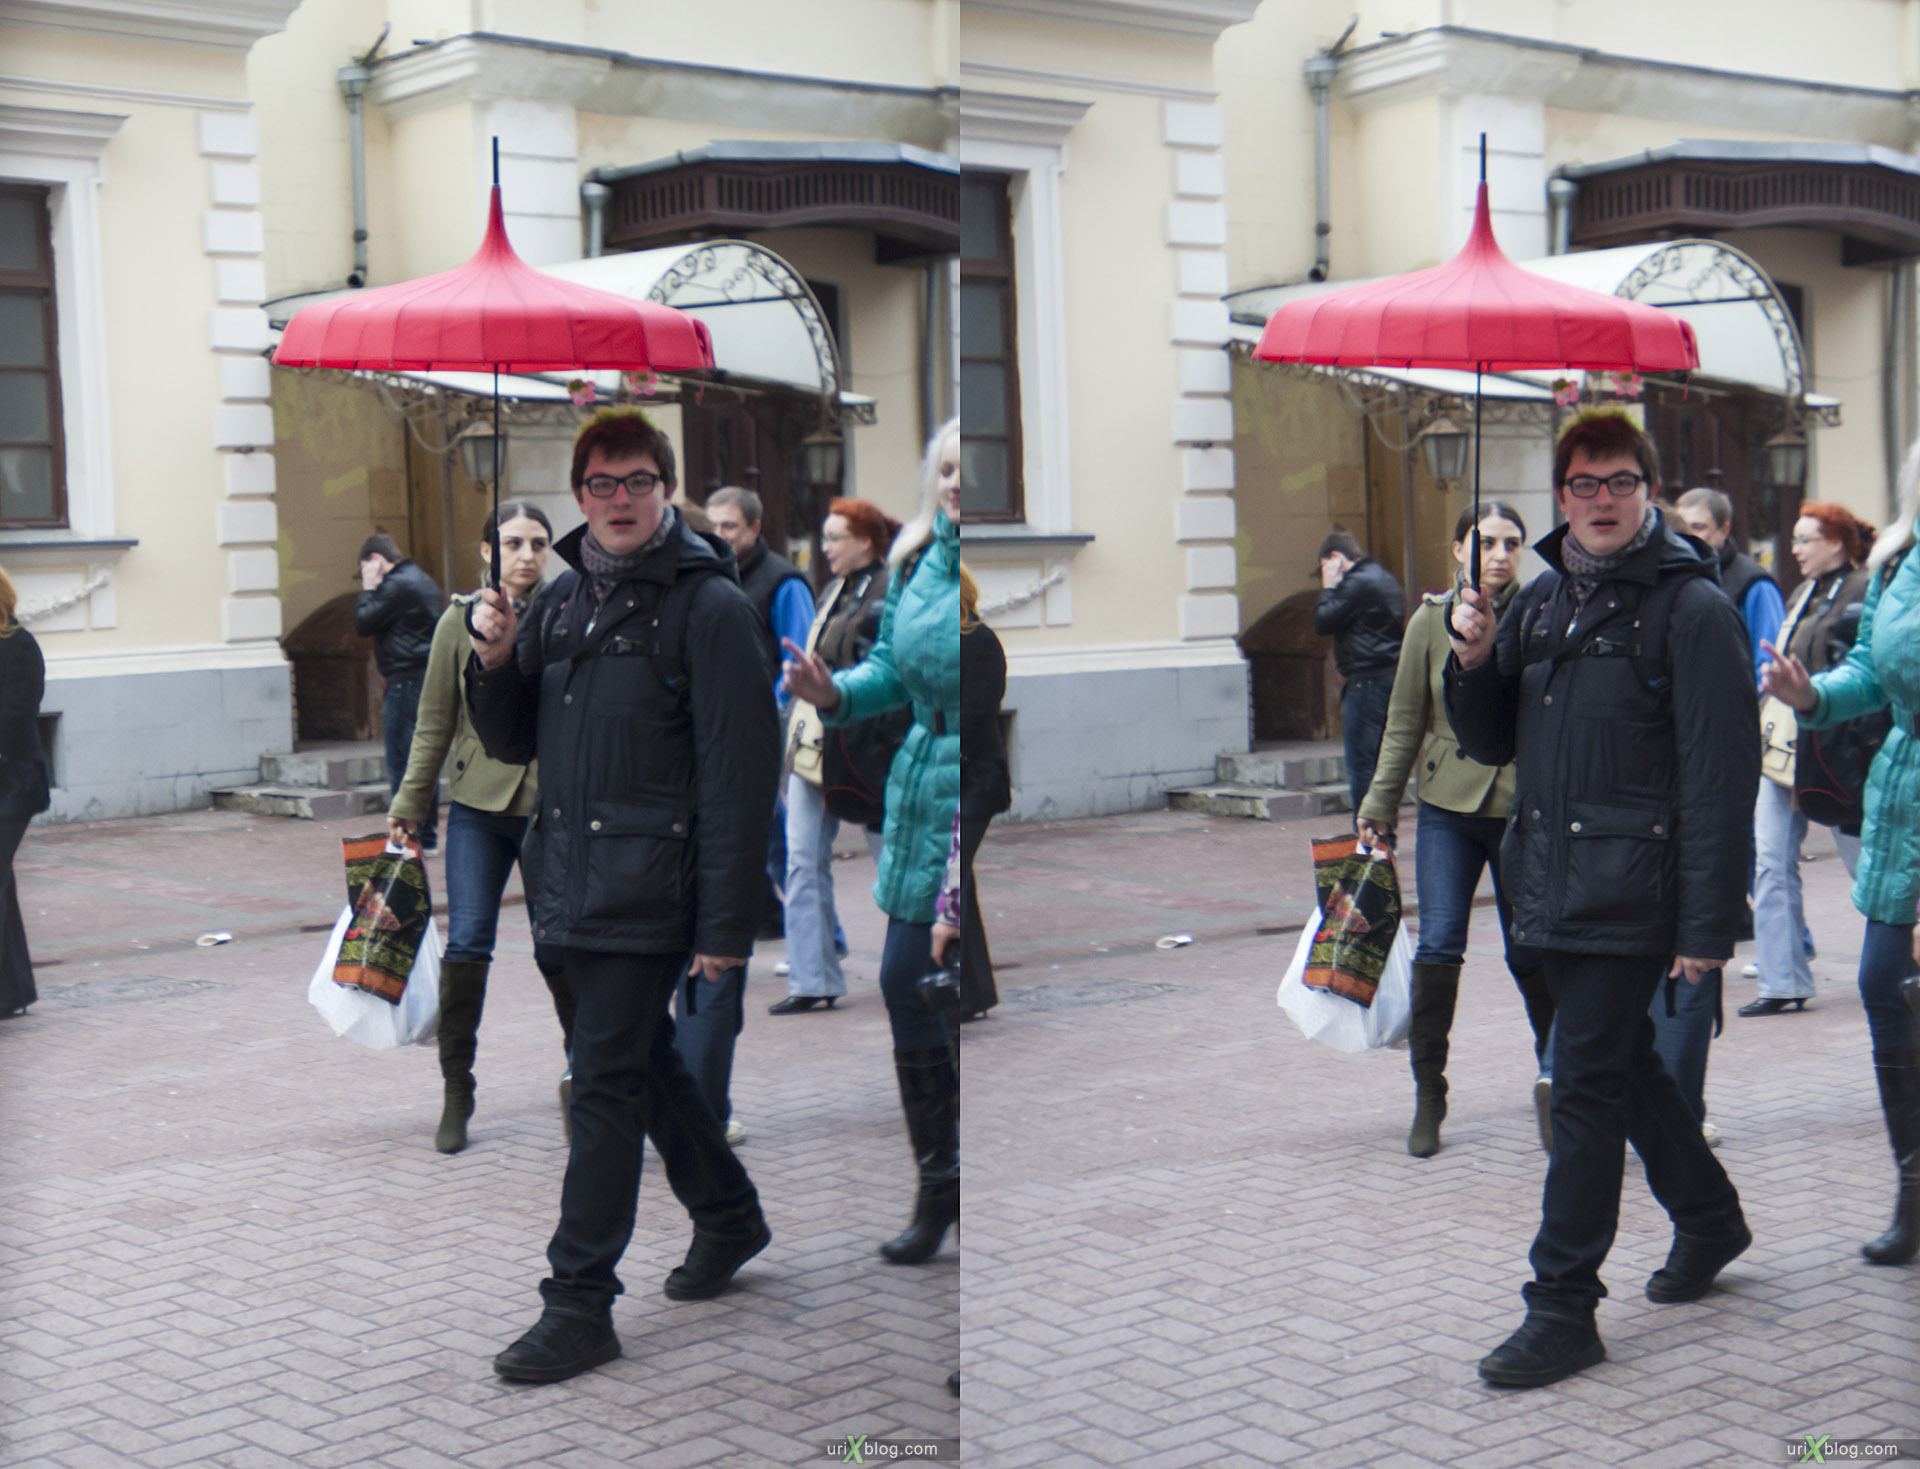 2011 Moscow, Dreamflash, Old Arbat st., Москва, Дримфлеш, Старый Арбат, Shot with Canon 5D mark 2, 3D, stereo, cross-eyed, стерео, стереопара, Loreo 3D lens in a cap